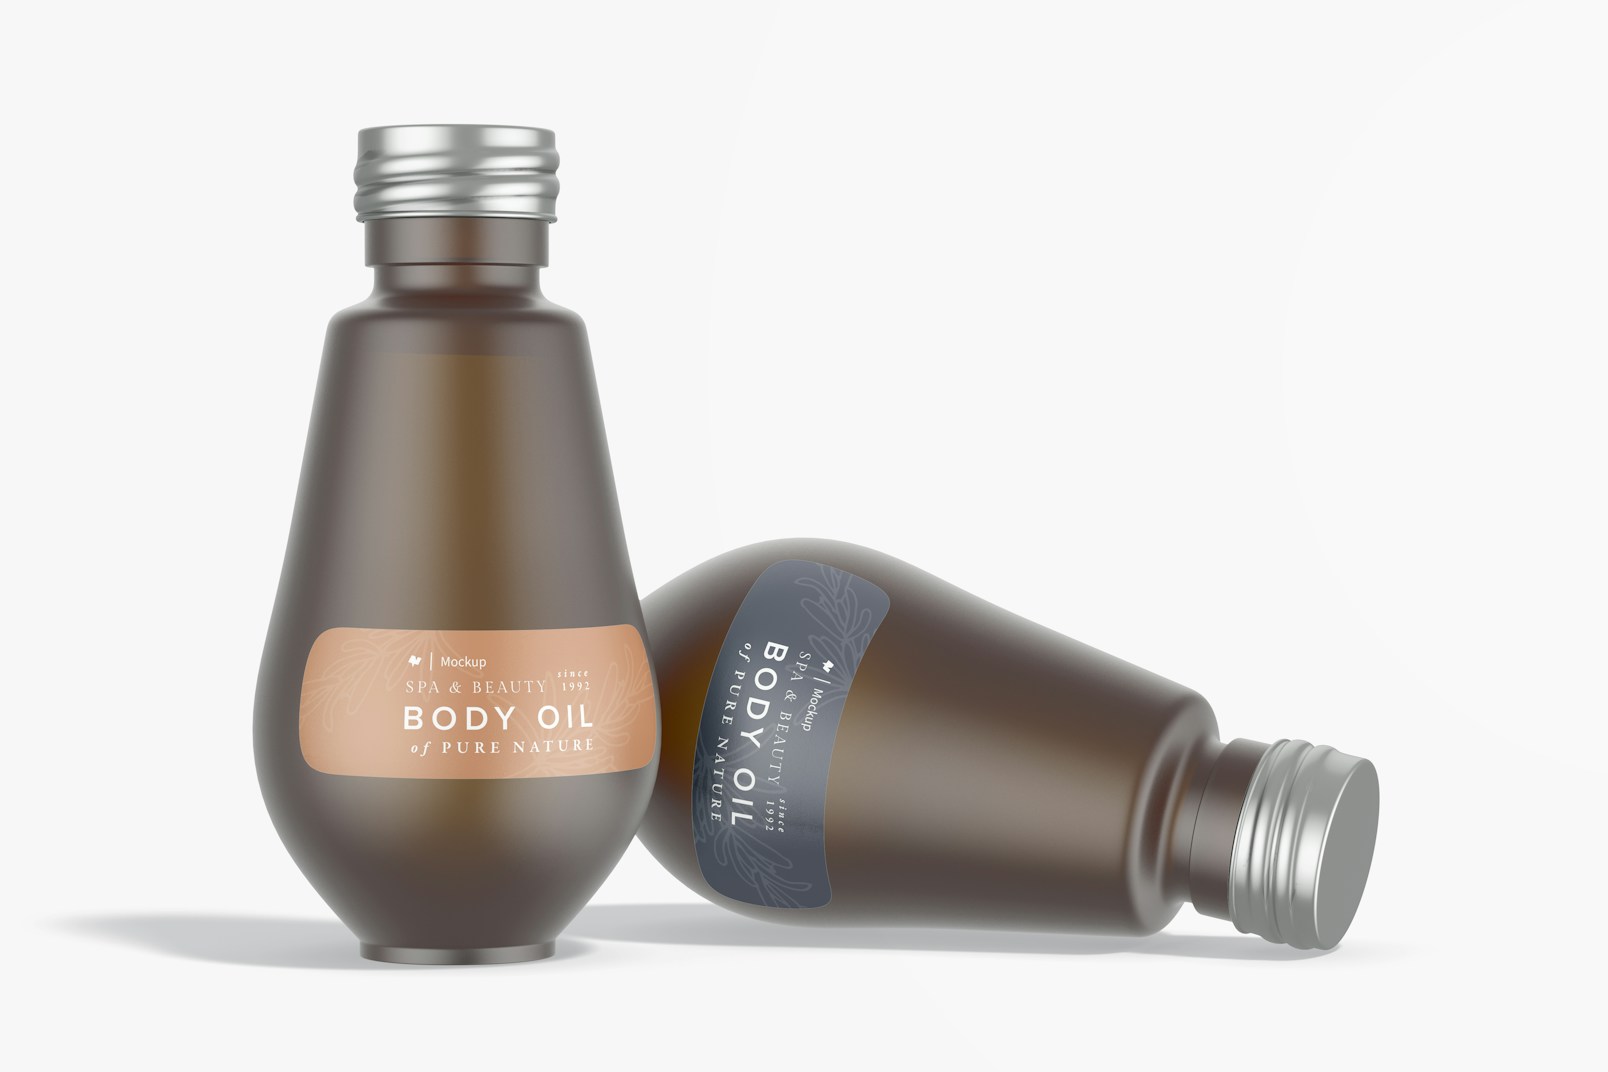 Amber Body Oil Bottles Mockup, Standing and Dropped